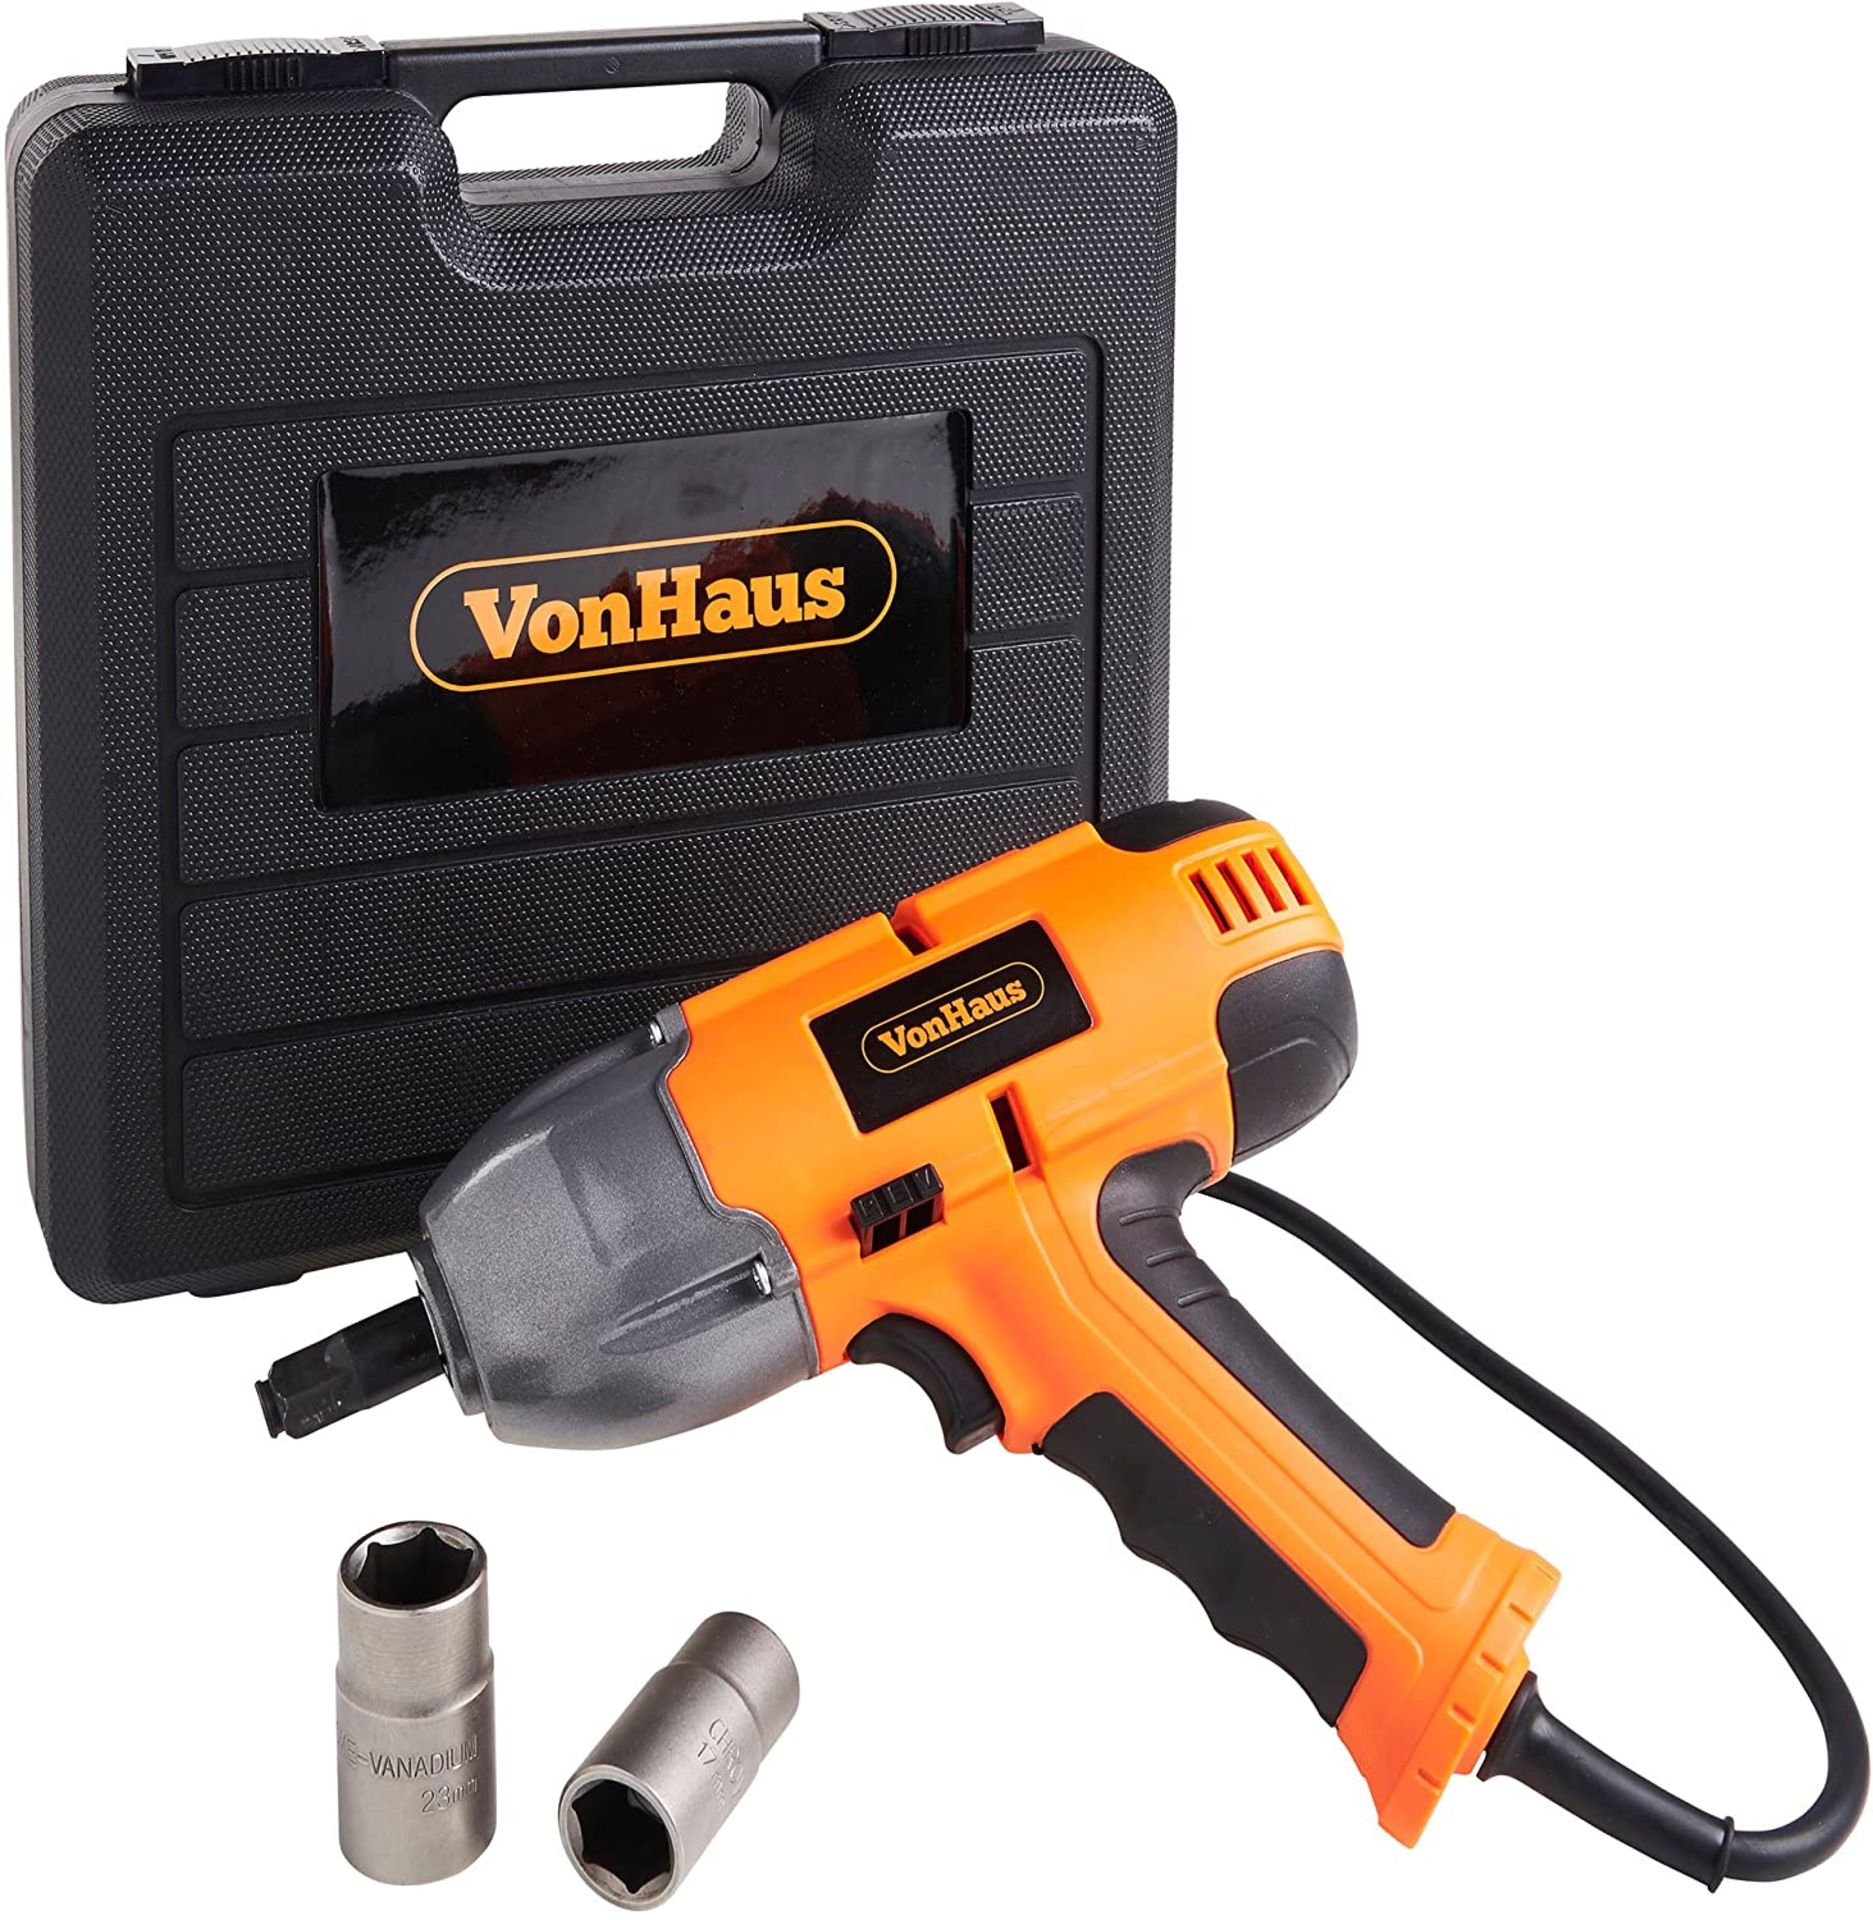 (WK25) Electric Impact Wrench Driver 230V – 500Nm – ½ inch Square Drive – 6000rpm Variab... - Image 3 of 3